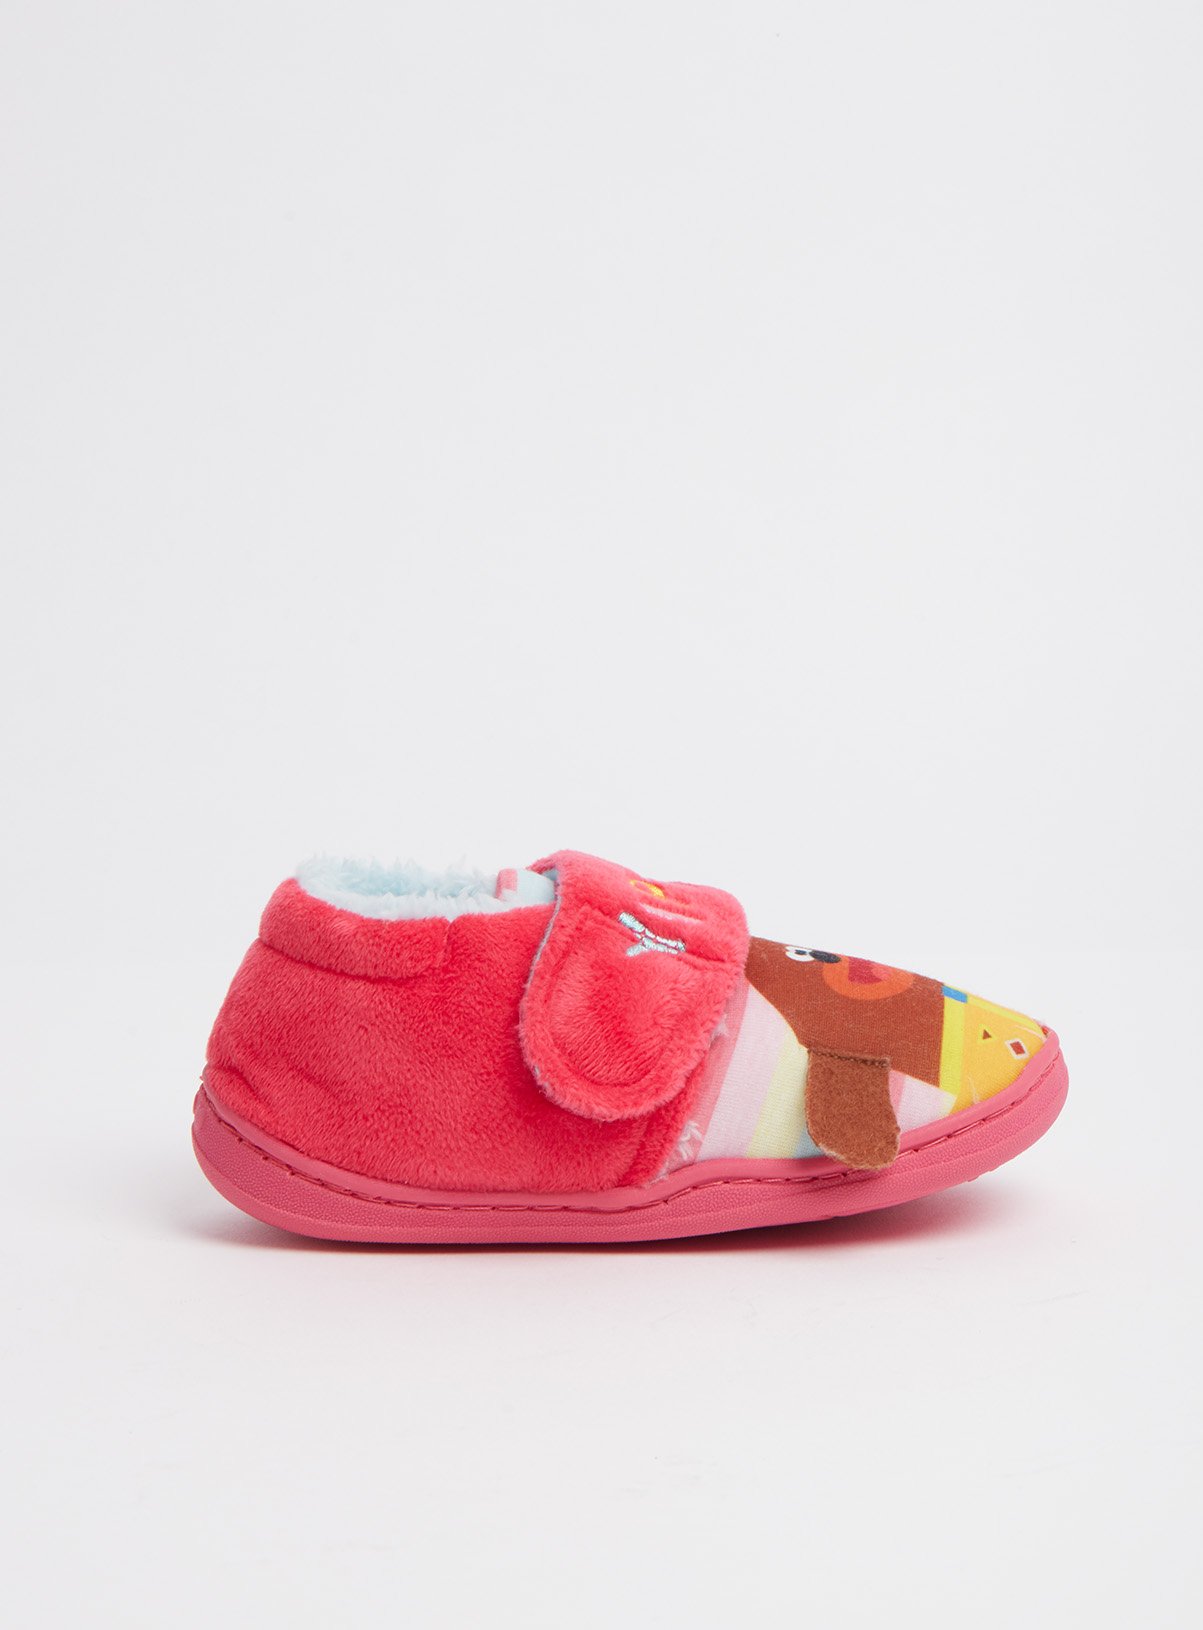 Hey Duggee Pink Fluffy Slippers Review